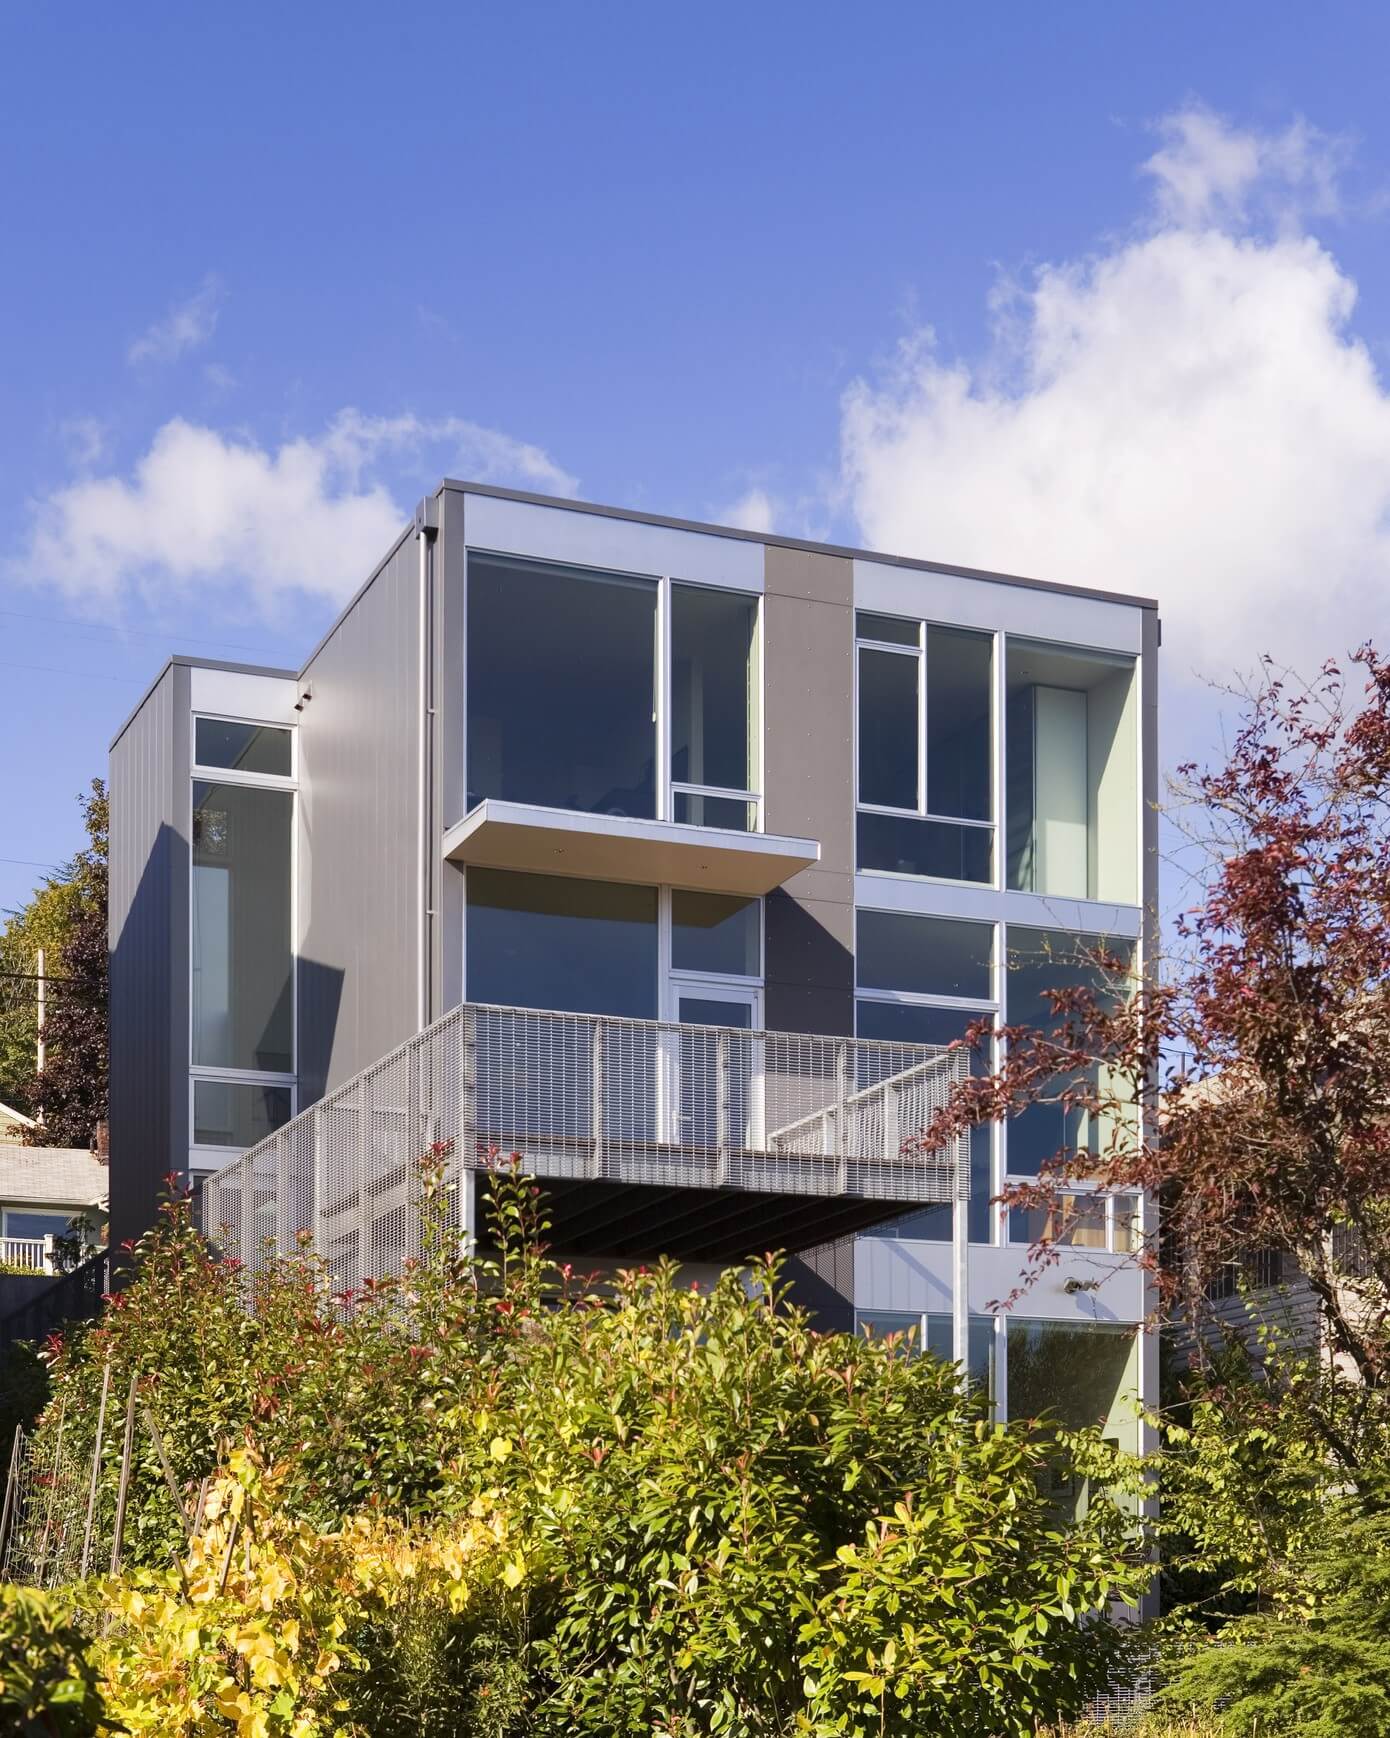 Stair House by David Coleman Architecture